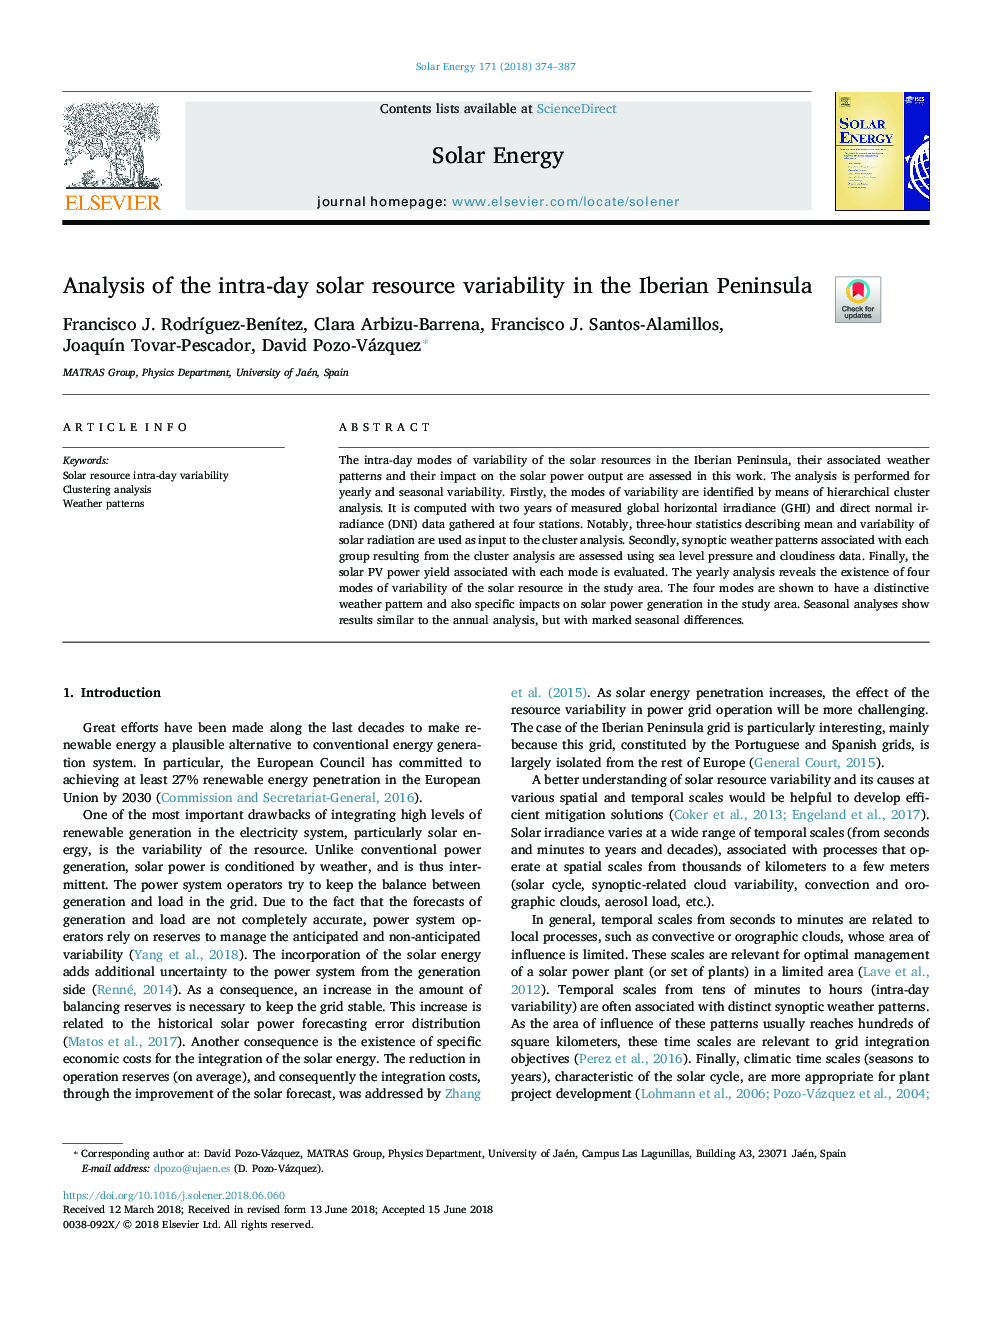 Analysis of the intra-day solar resource variability in the Iberian Peninsula